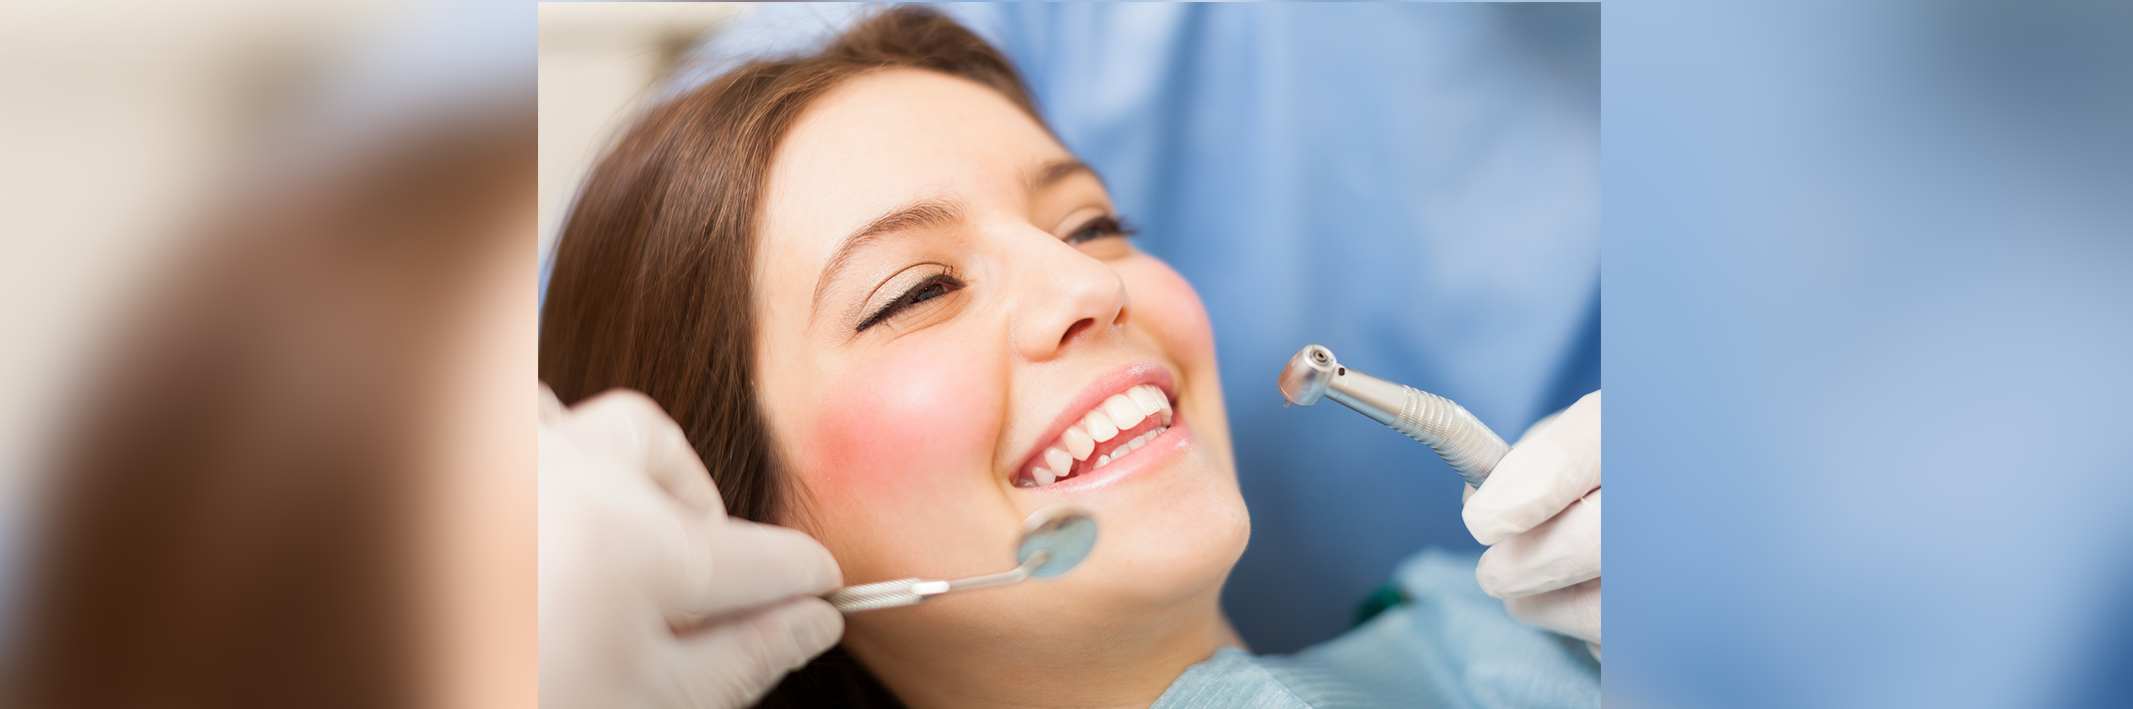 What Does Professional Teeth Cleaning Involve?